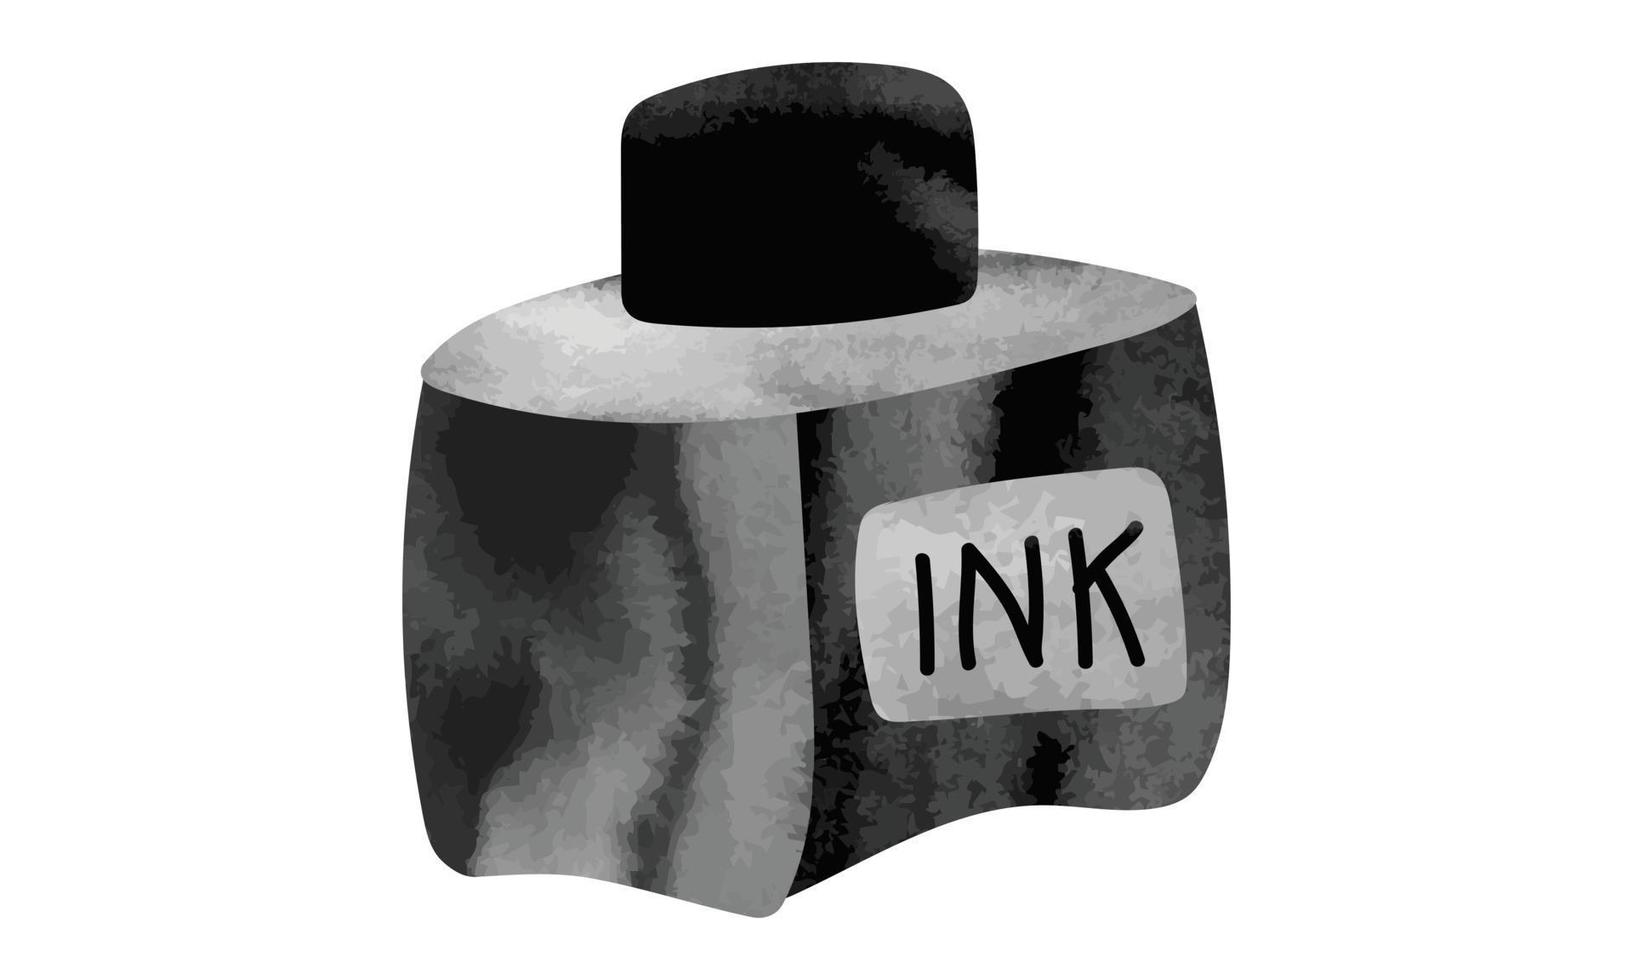 Inkpot watercolor hand drawn vector illustration isolated on white background. Inkwell watercolor style. Ink bottle clipart